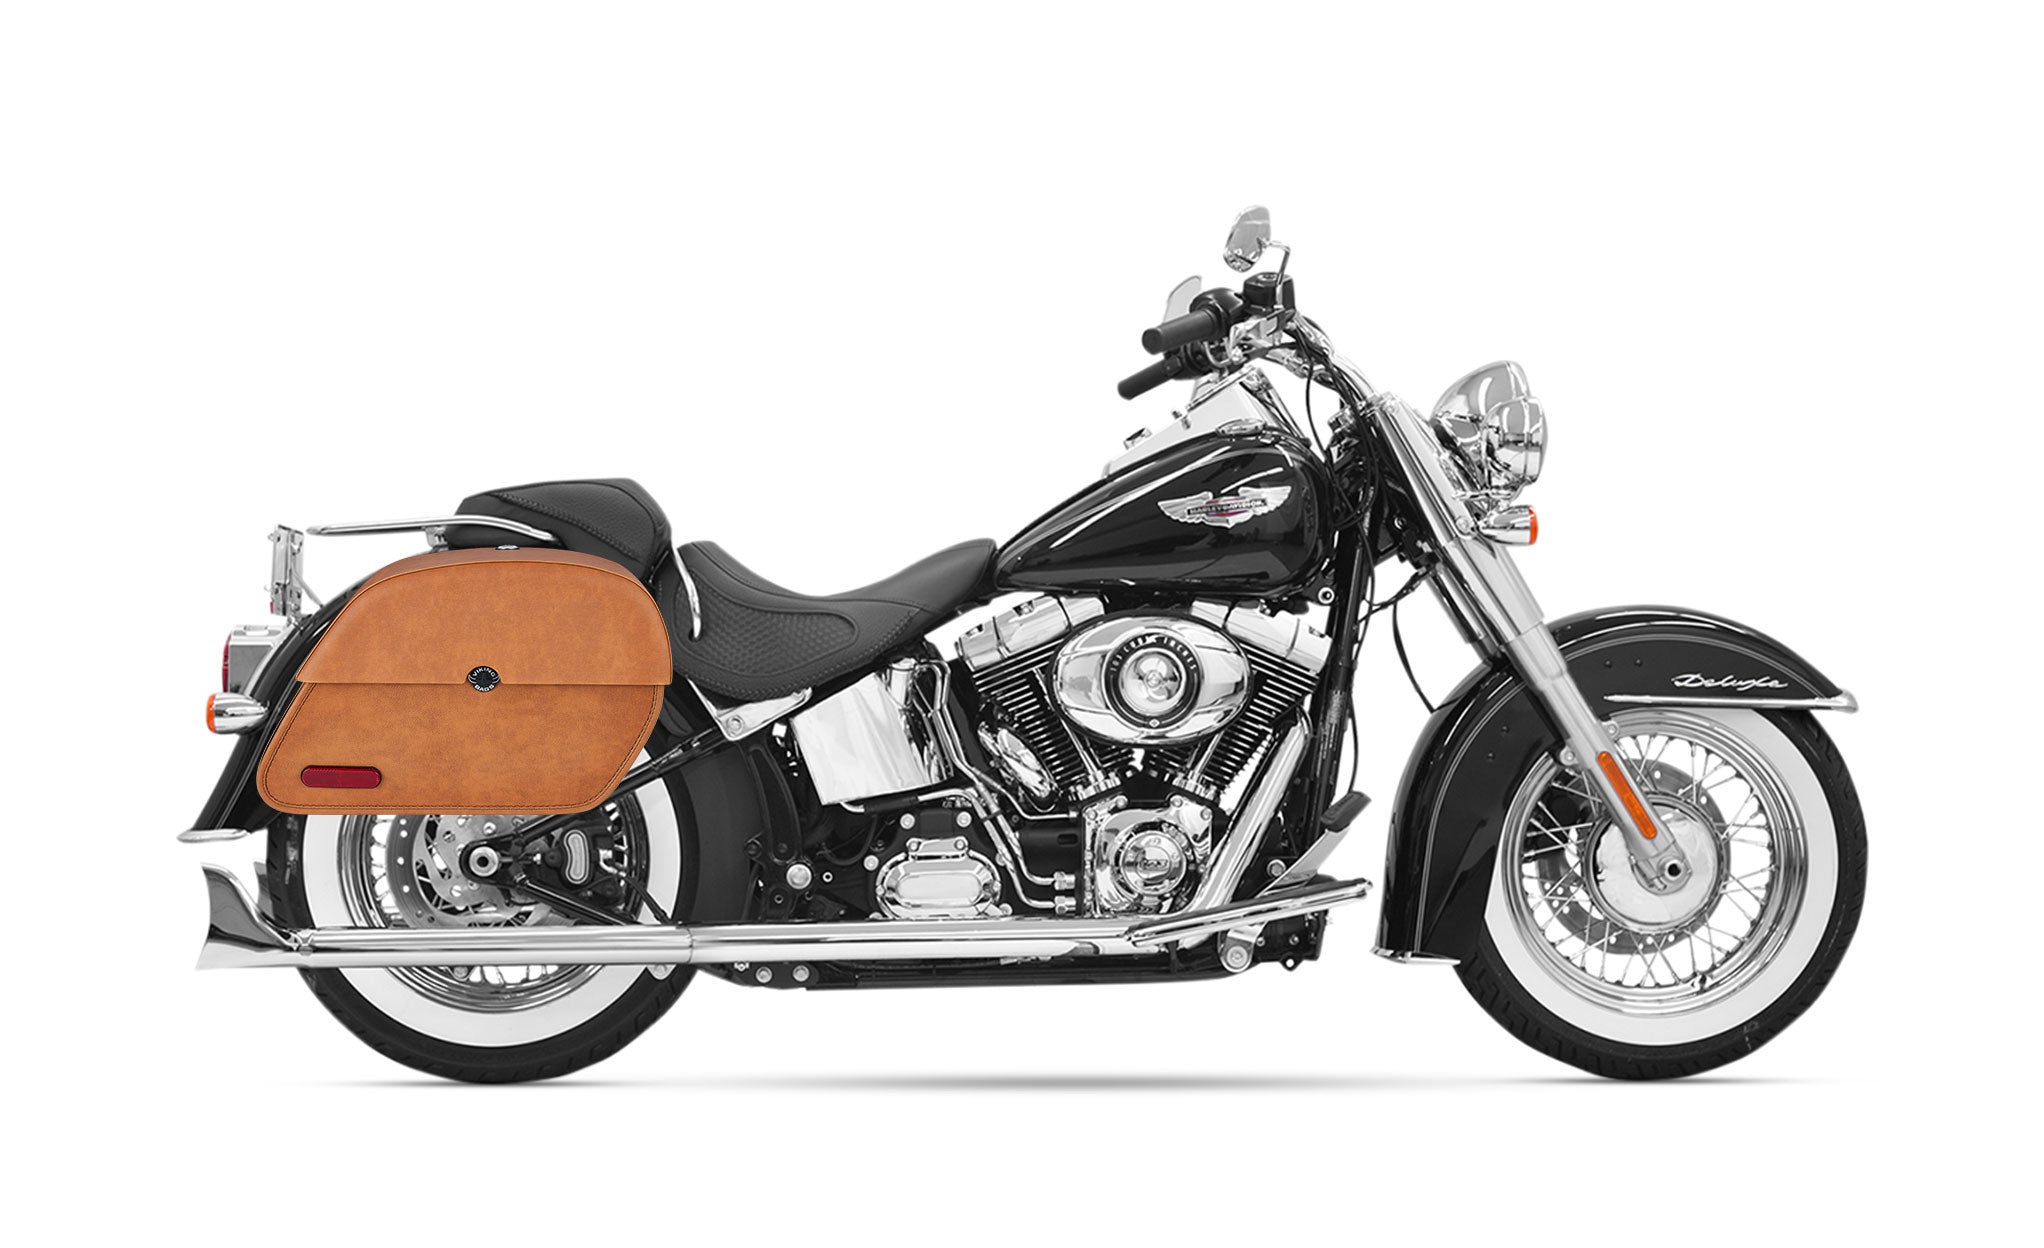 33L - Panzer Brown Large Leather Motorcycle Saddlebags for Harley Softail Heritage FLSTICCI on Bike Photo @expand